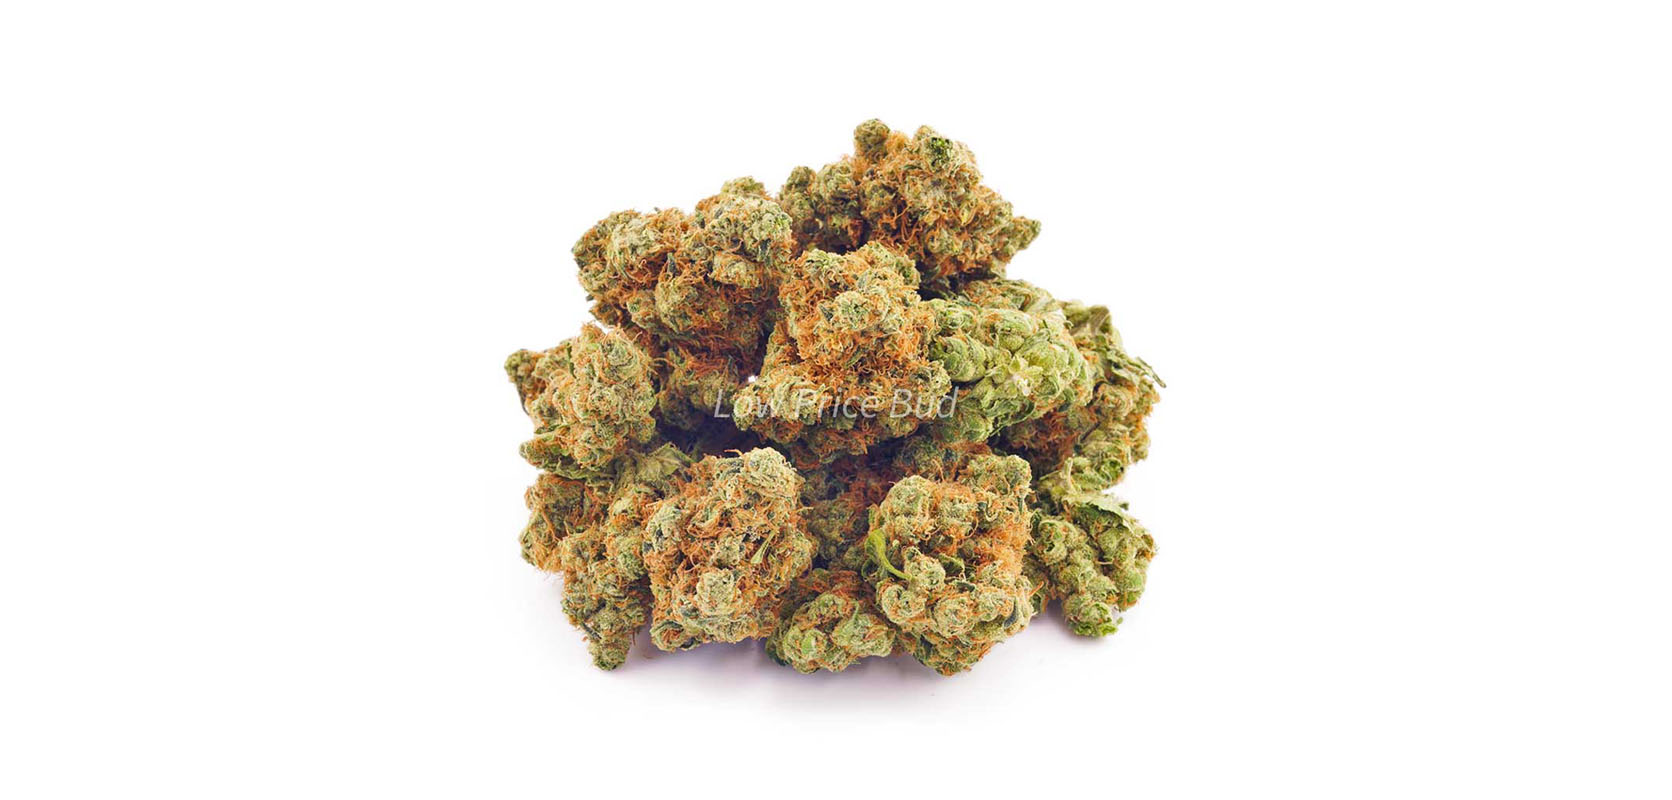 Key Lime Pie weed for sale. BudgetBuds of weed online. Where to buy weed online in Canada. 